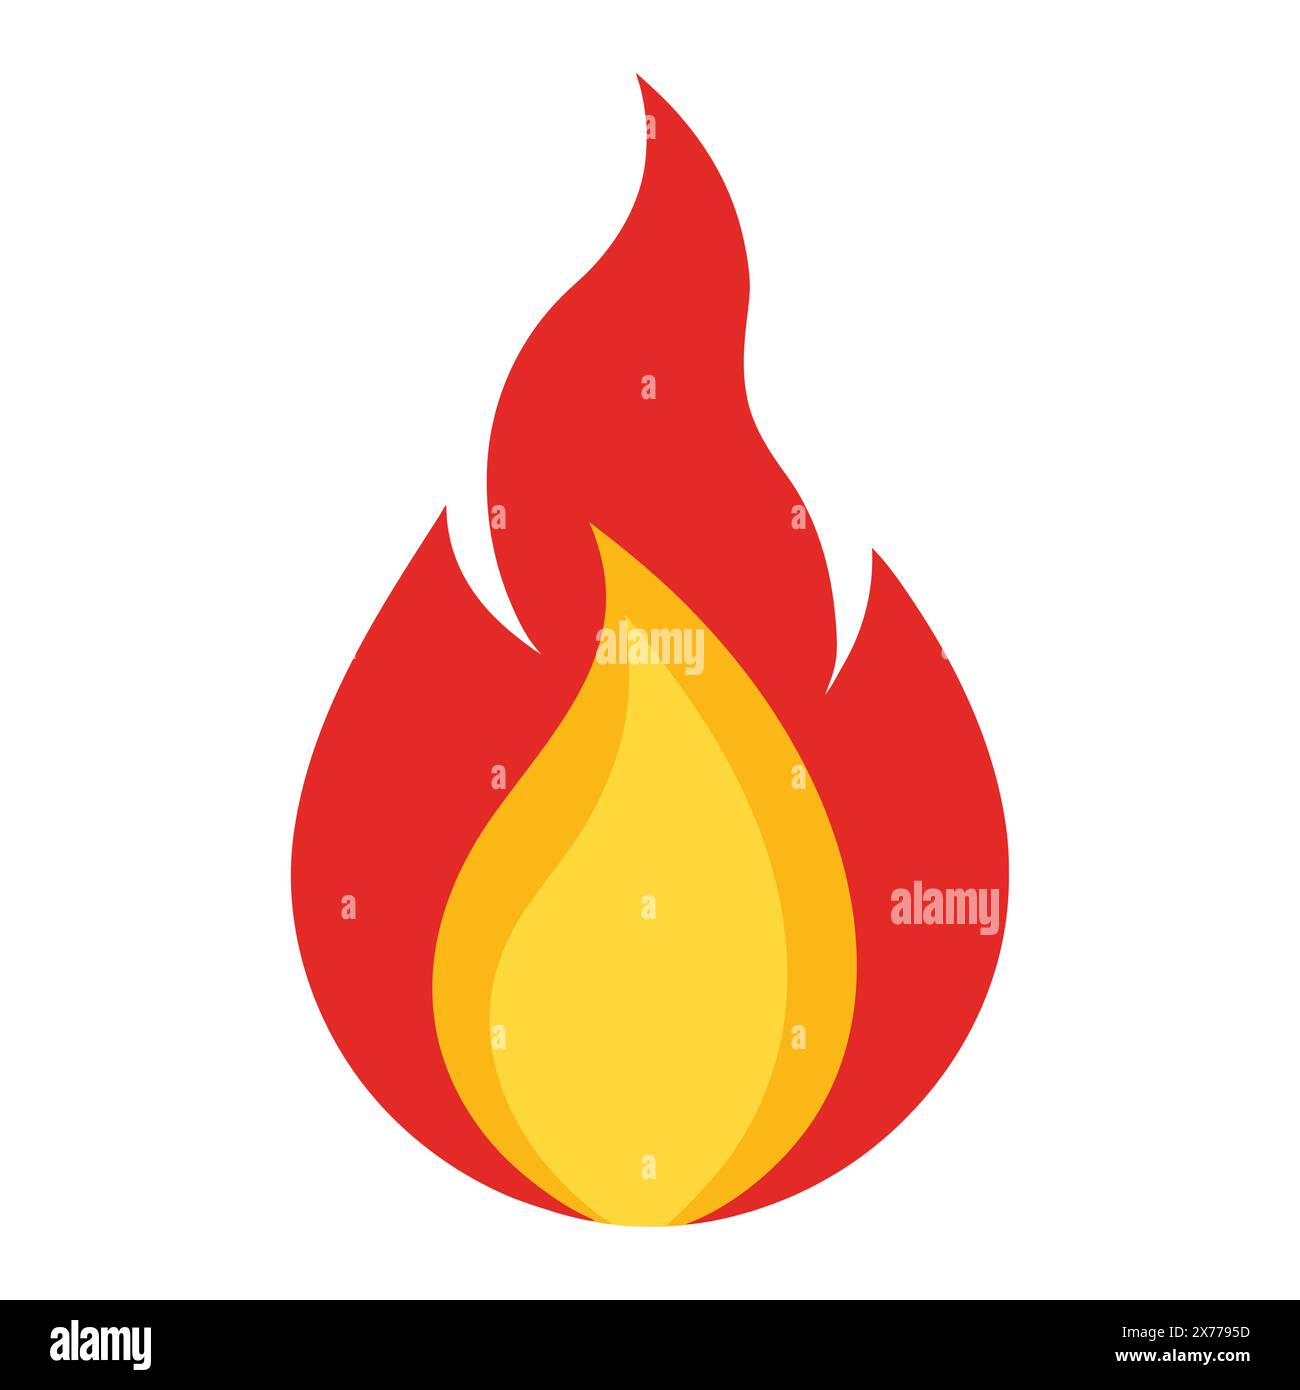 A flame in a red base with yellow top, isolated on a white background. Stock Vector